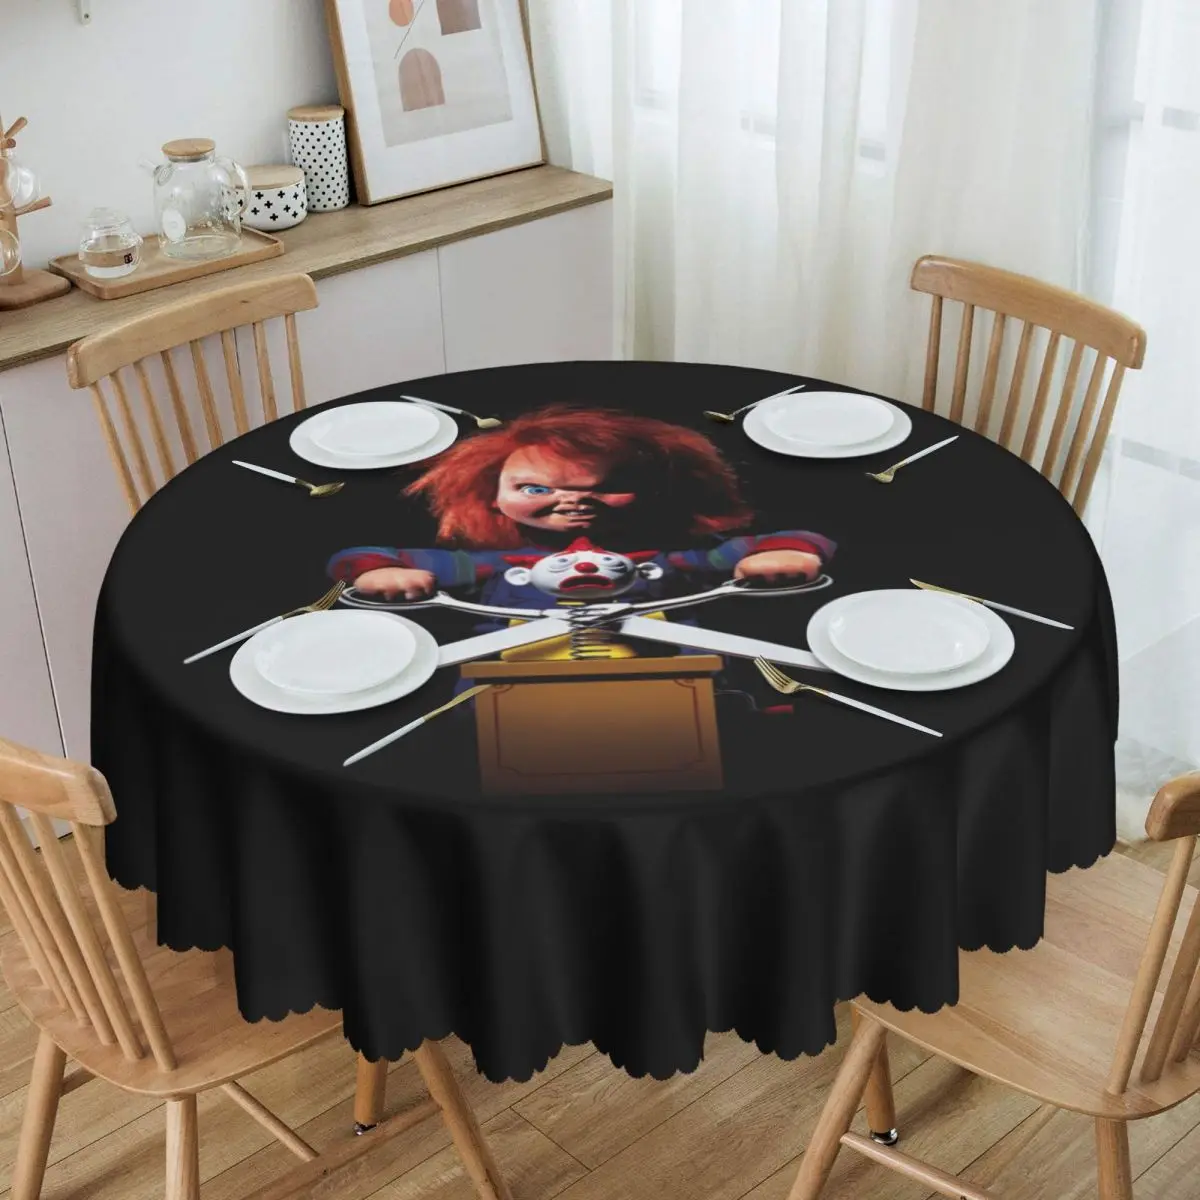 

Round Waterproof Horror Killer Chucky Table Cover Child's Play Movie Tablecloth for Dining 60 inch Table Cloth